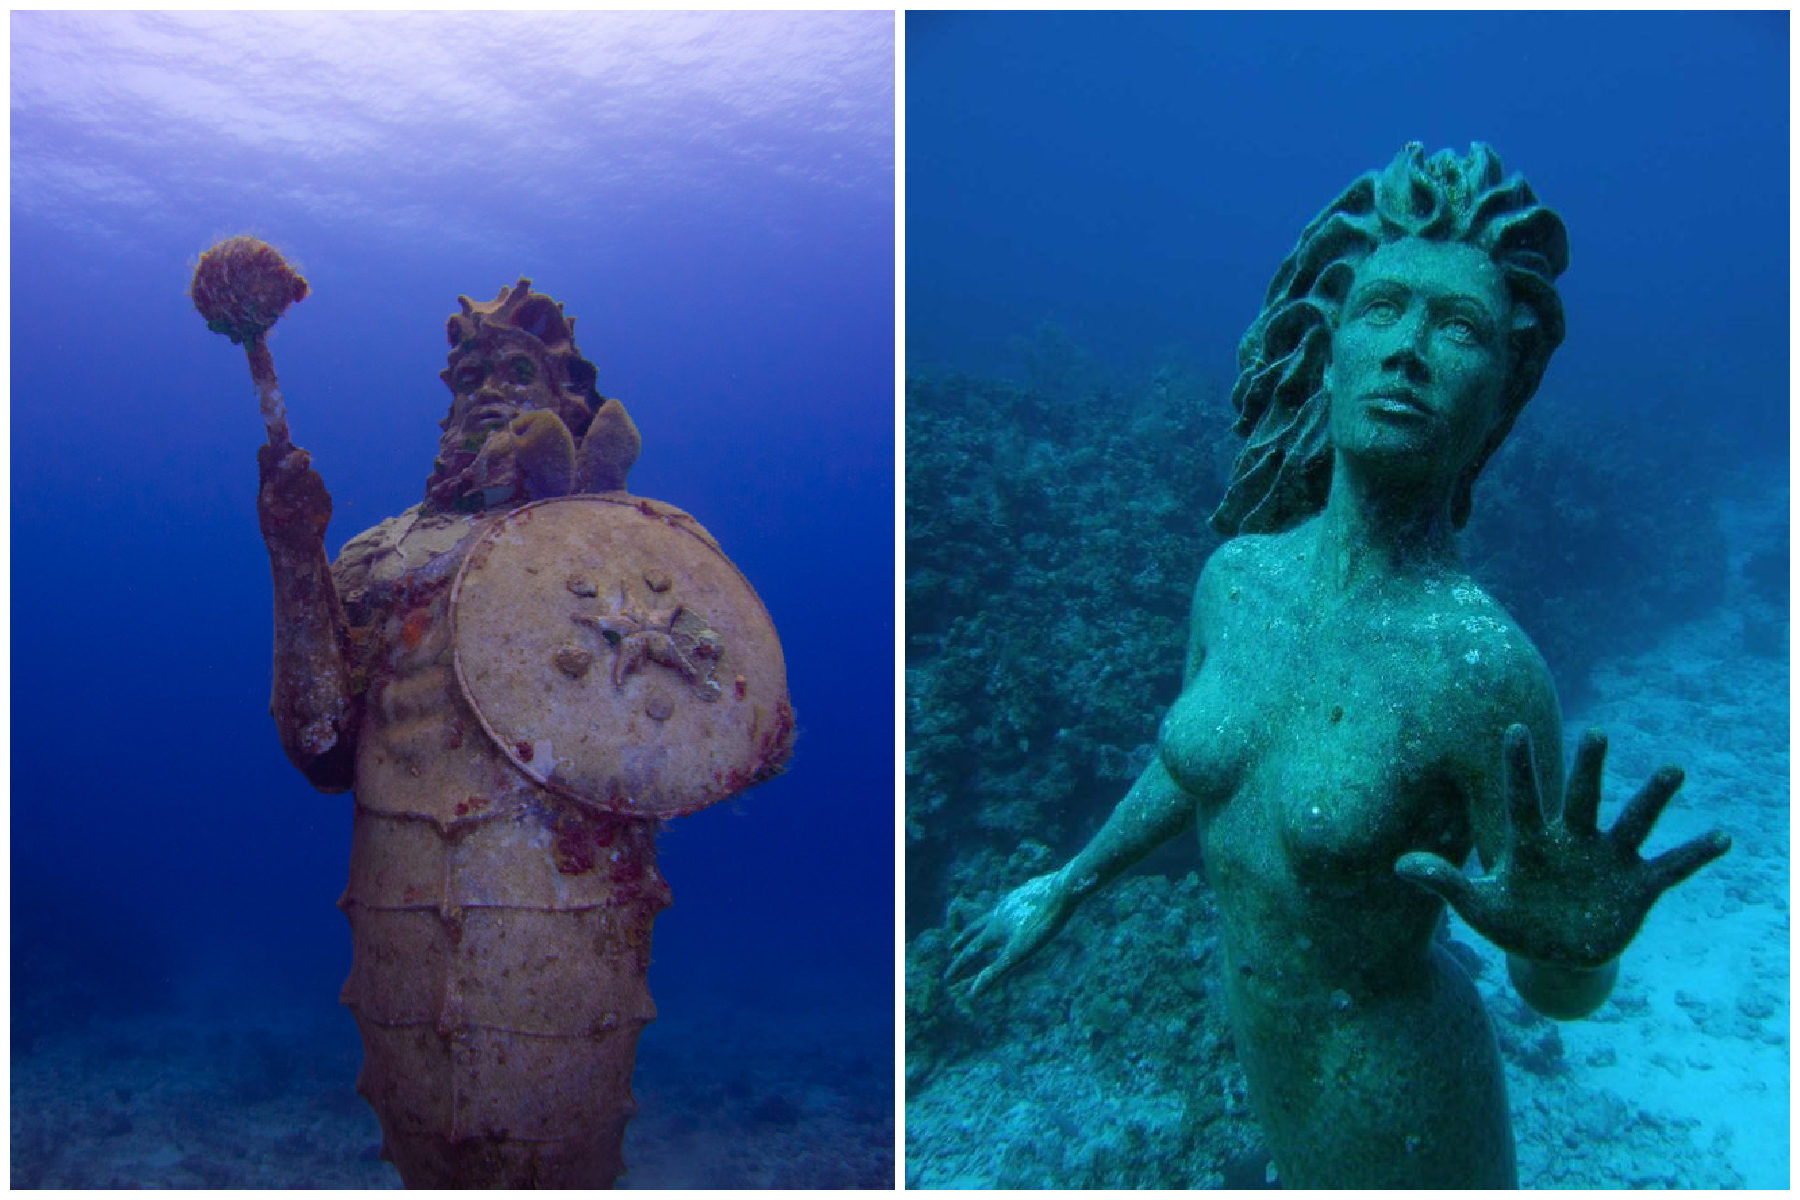 10 fascinating underwater statues you need to see (with photos)